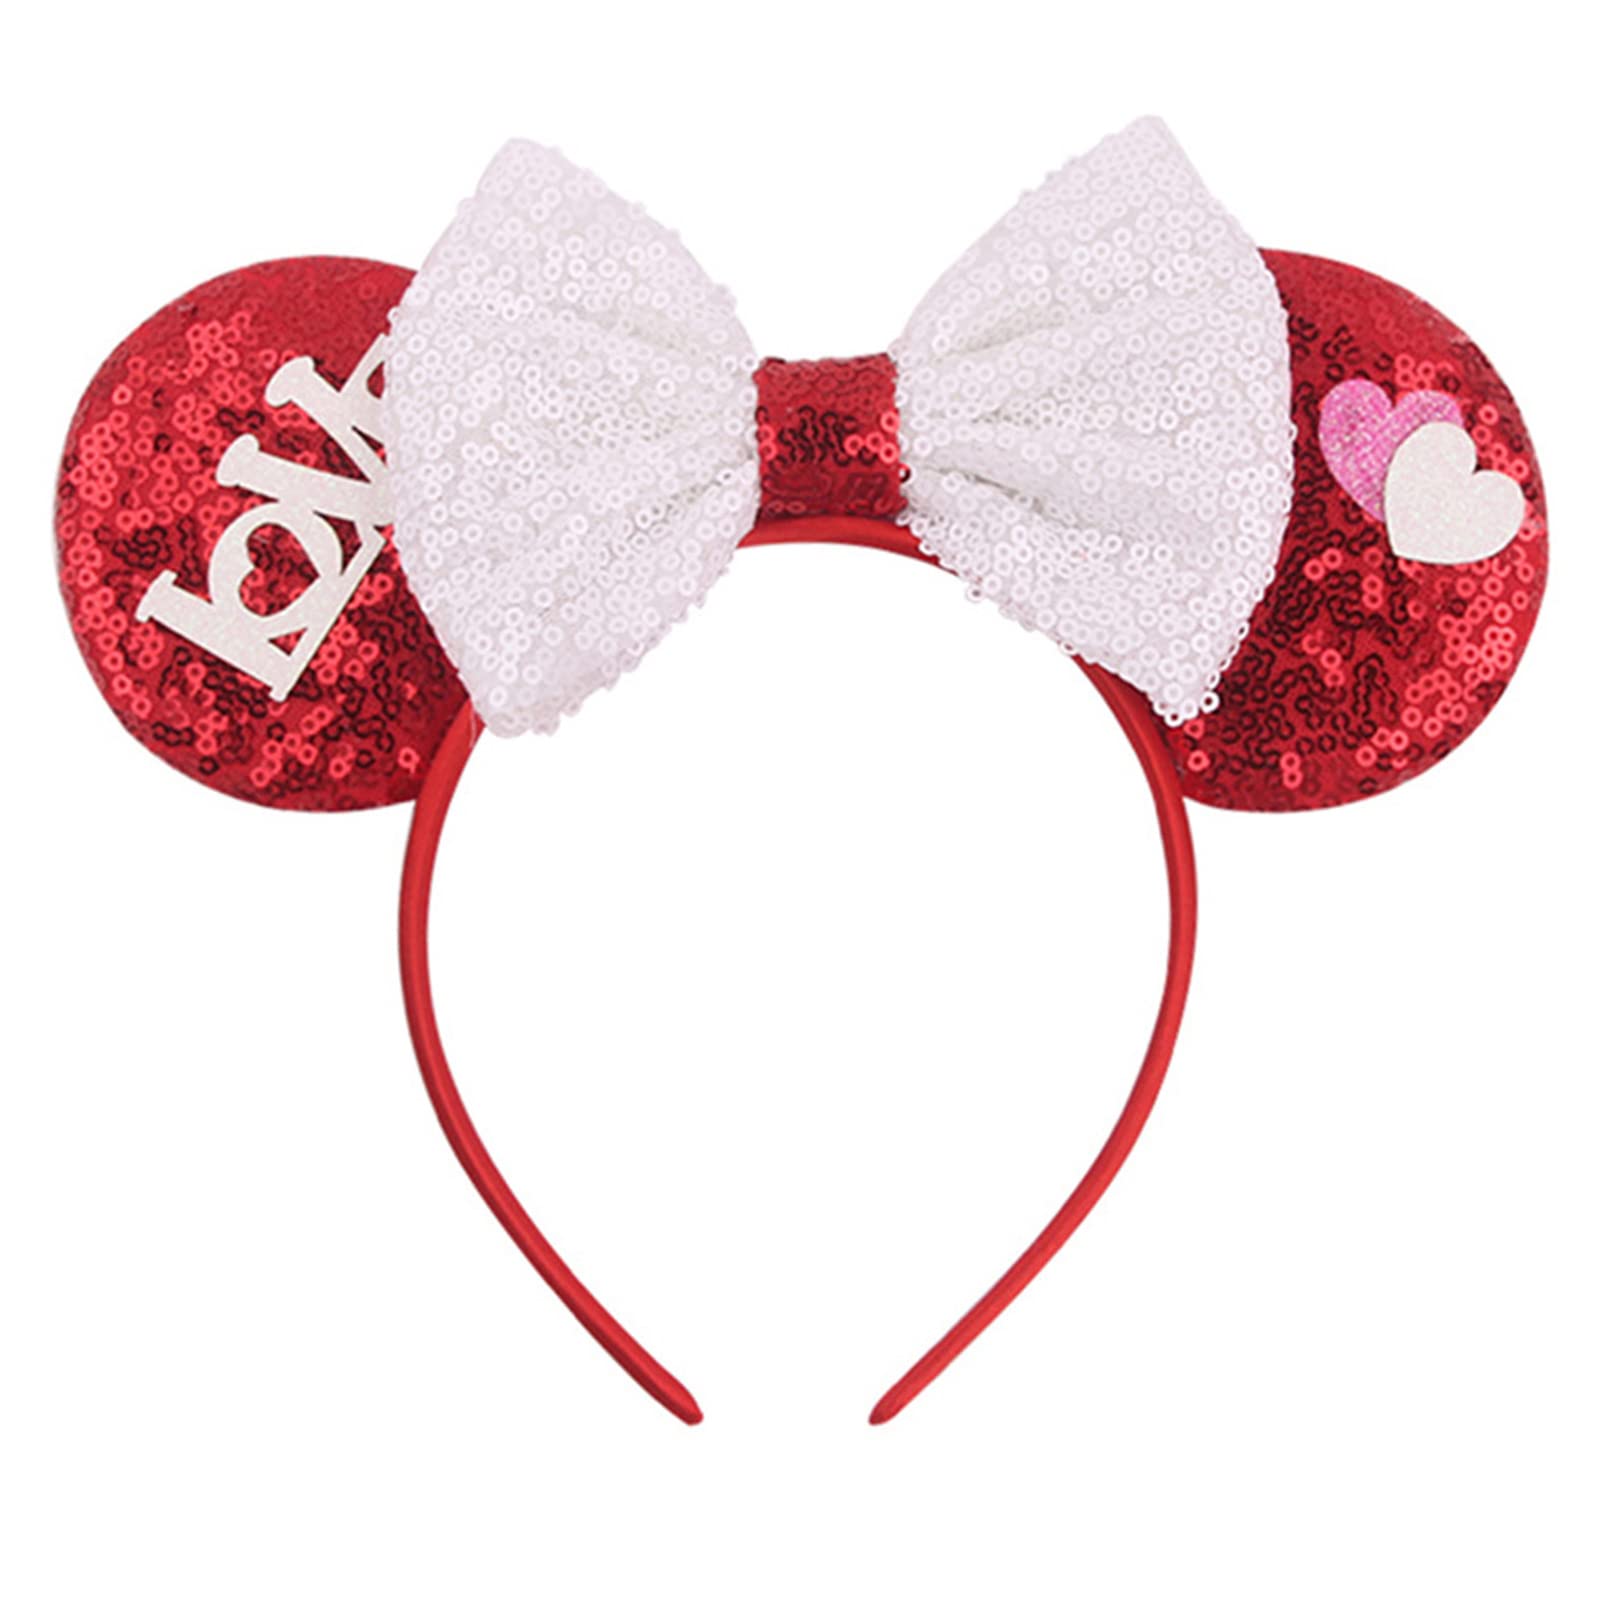 QHSWDLP Mouse Ears Headbands Shiny Bows Minnie Ear Hair Band Princess Decoration Cosplay Costume Accessory for Women Girls